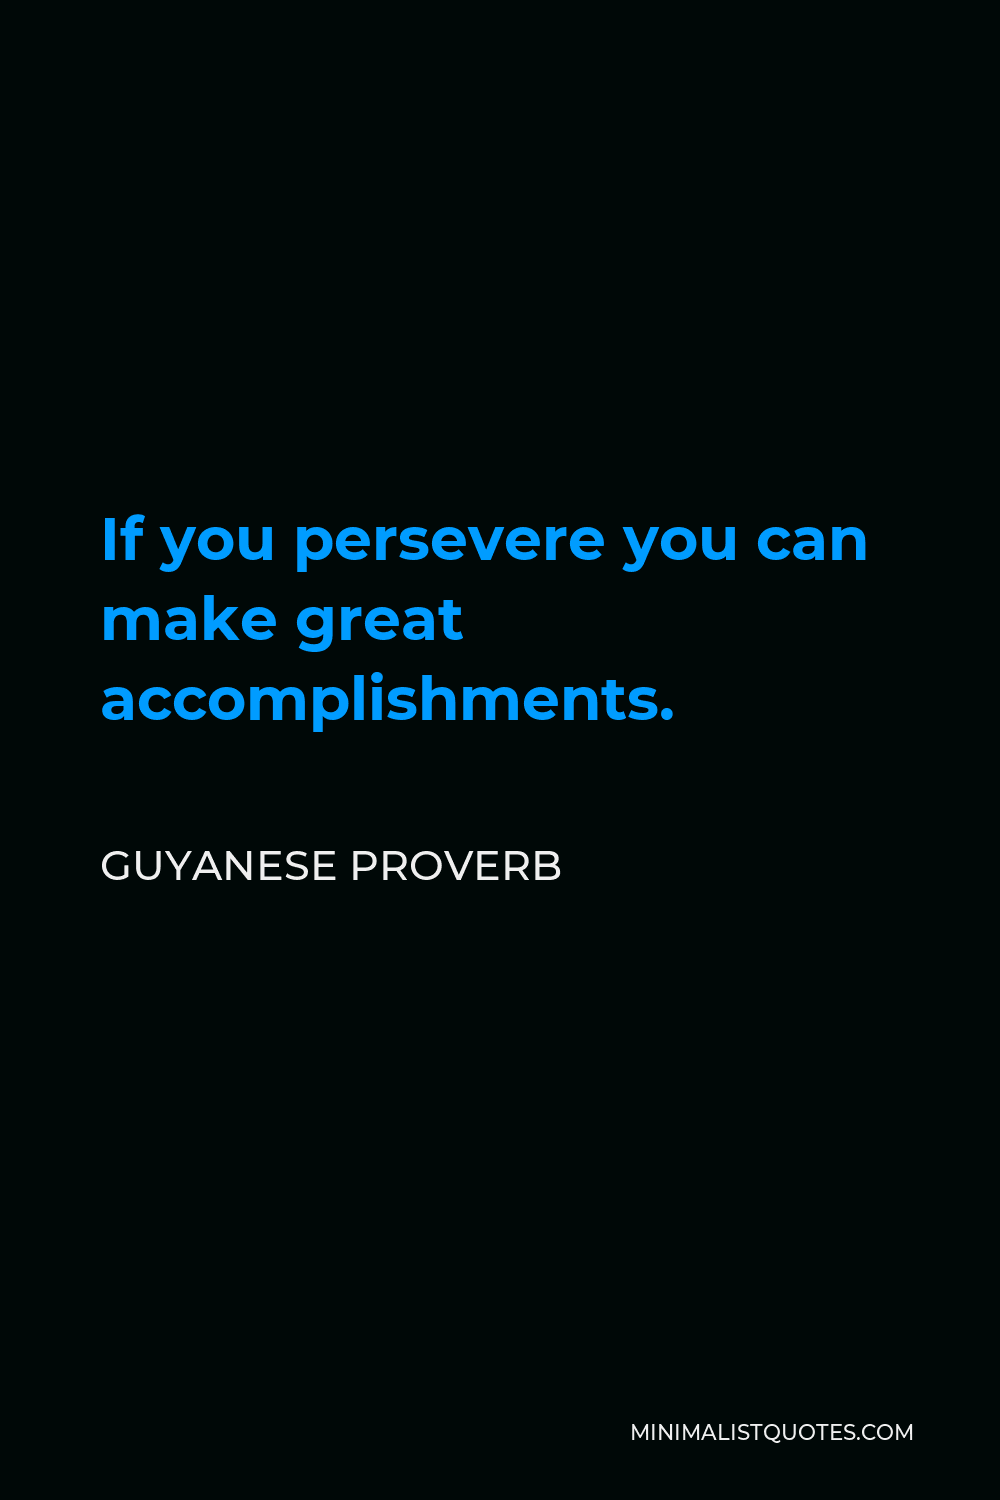 Guyanese Proverb Quote - If you persevere you can make great accomplishments.